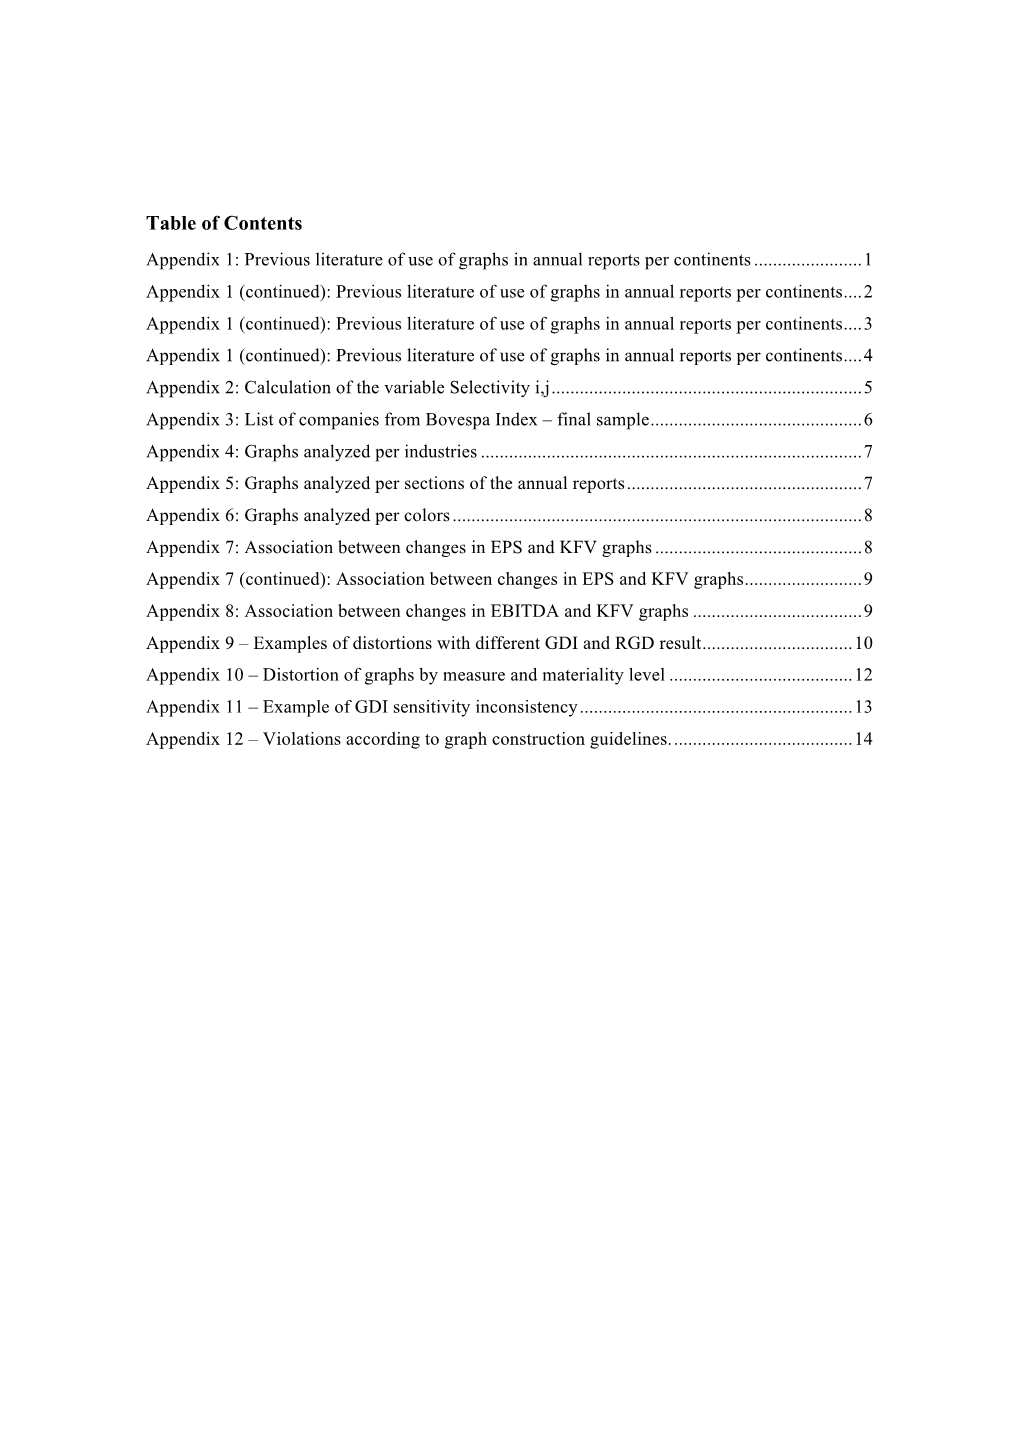 Table of Contents Appendix 1: Previous Literature of Use of Graphs in Annual Reports Per Continents